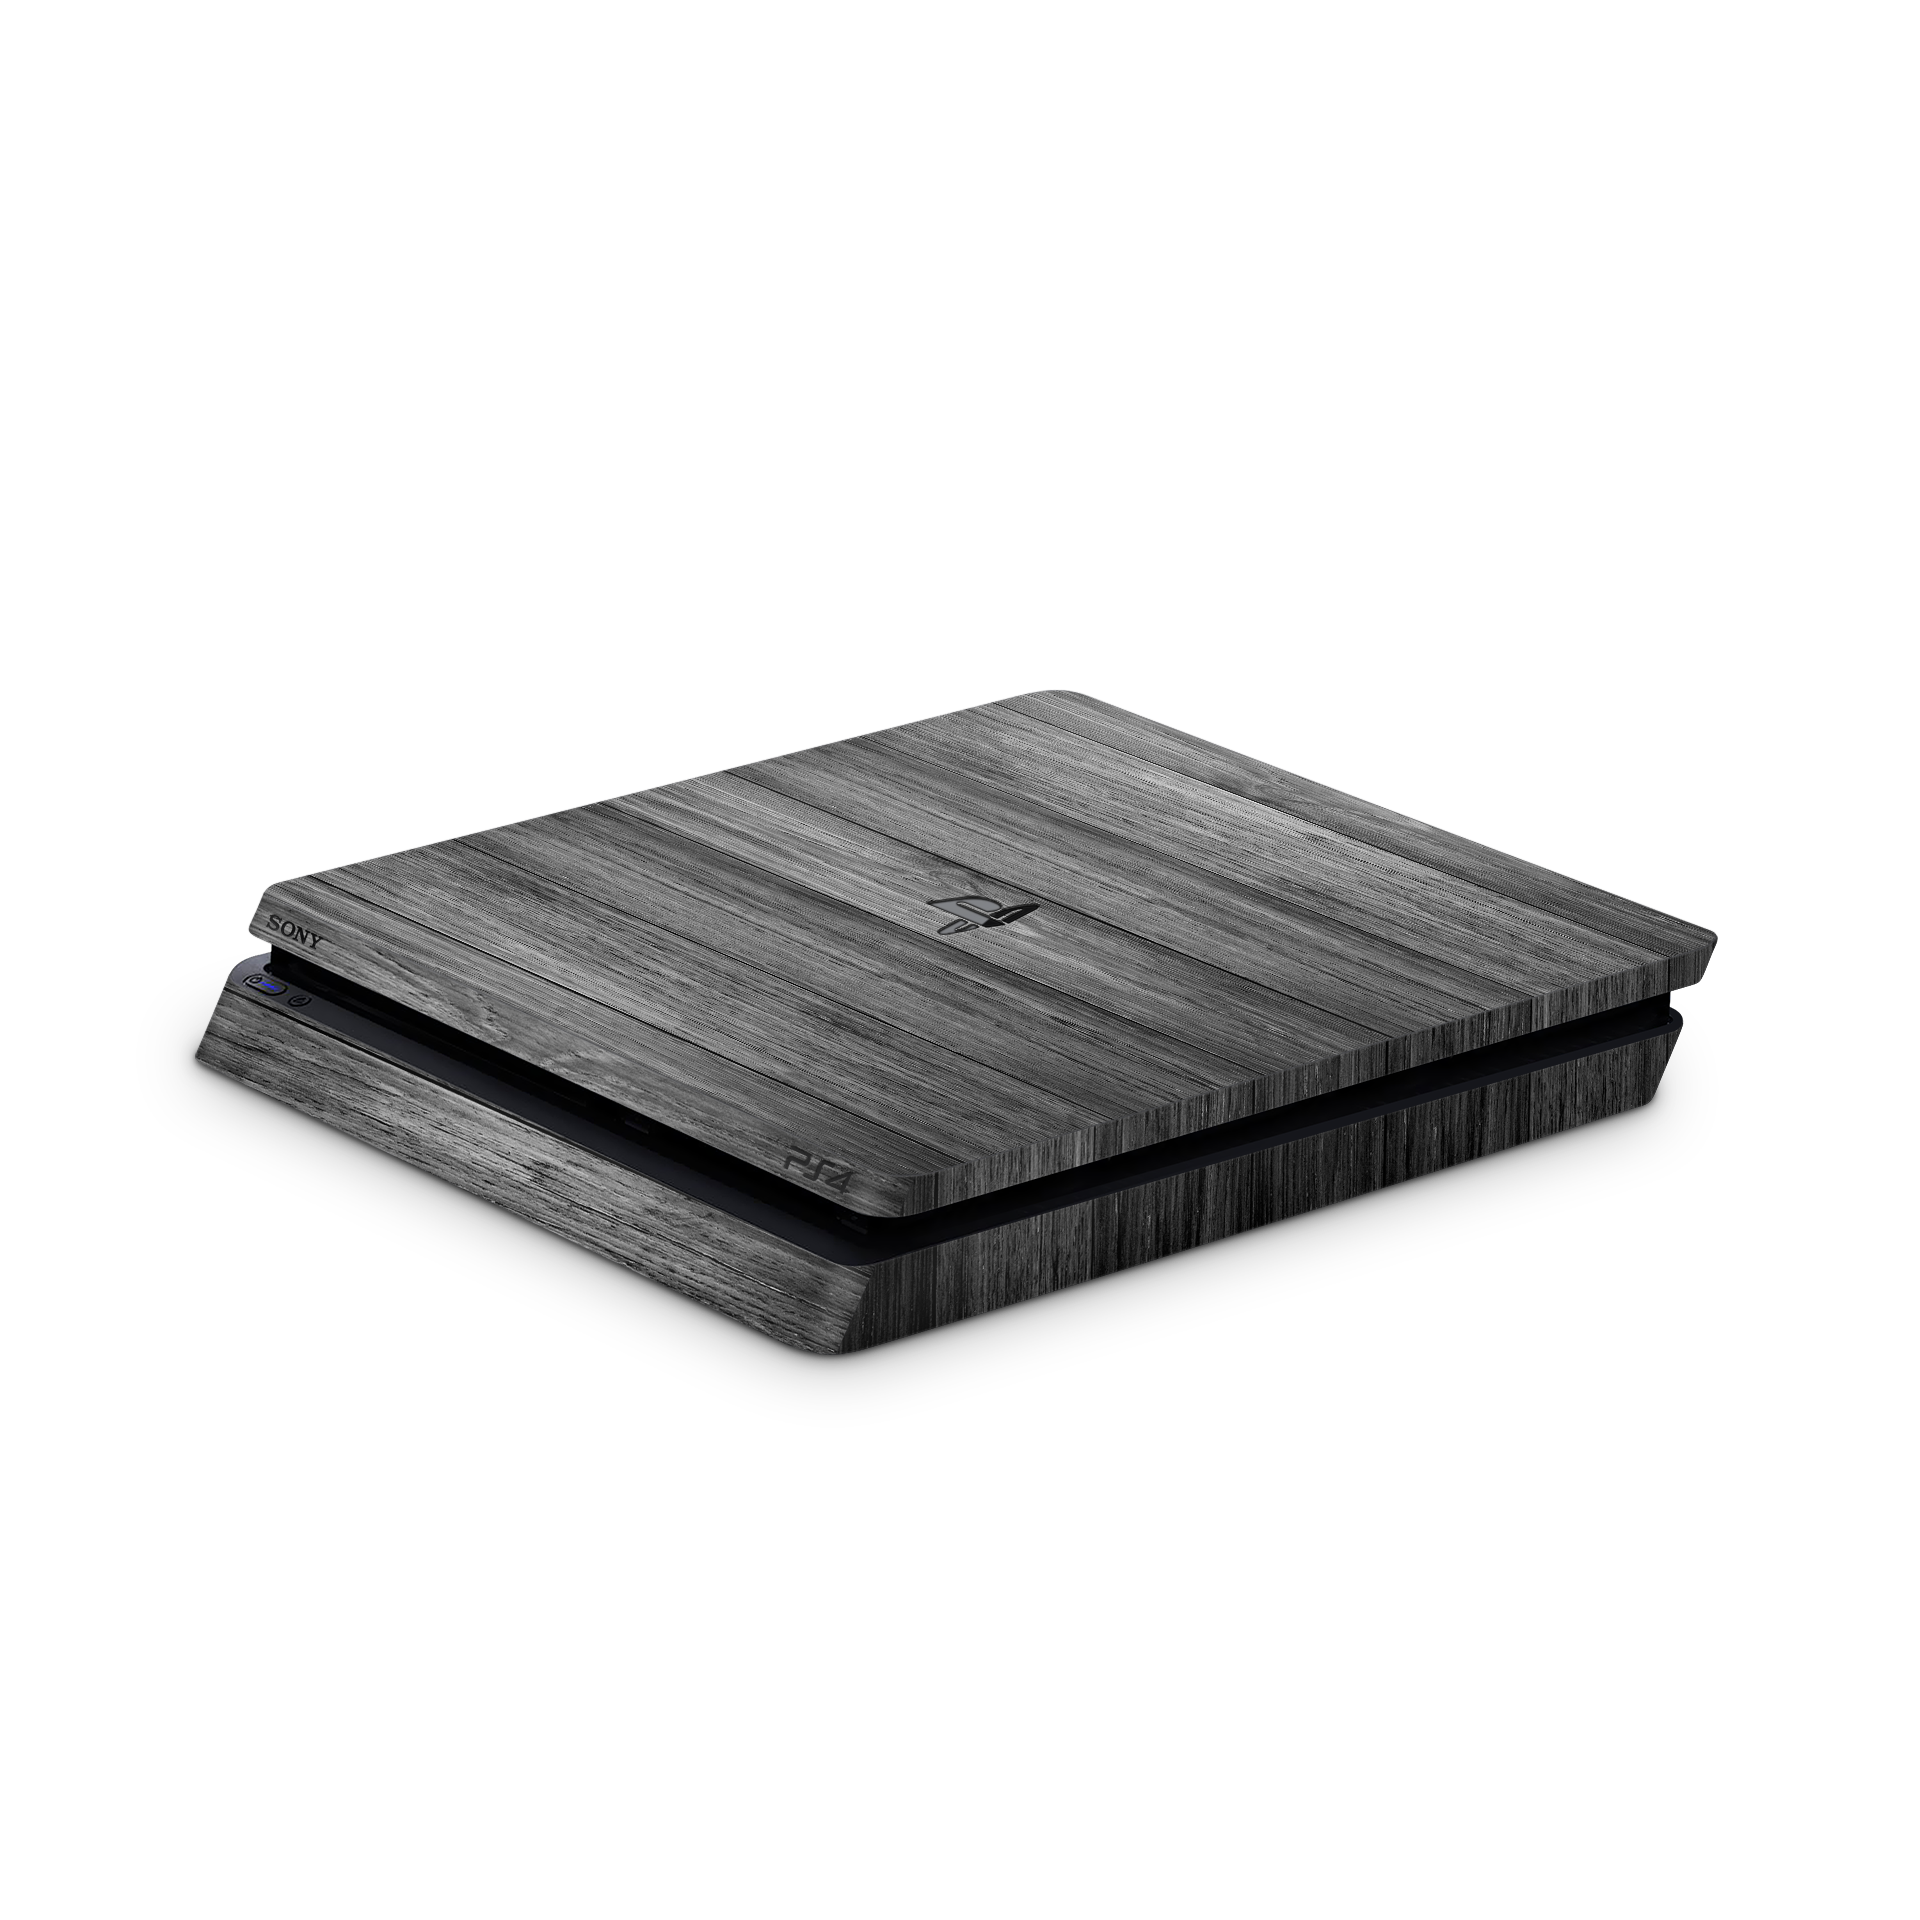 wood-texture-ps4-slim-console-skin